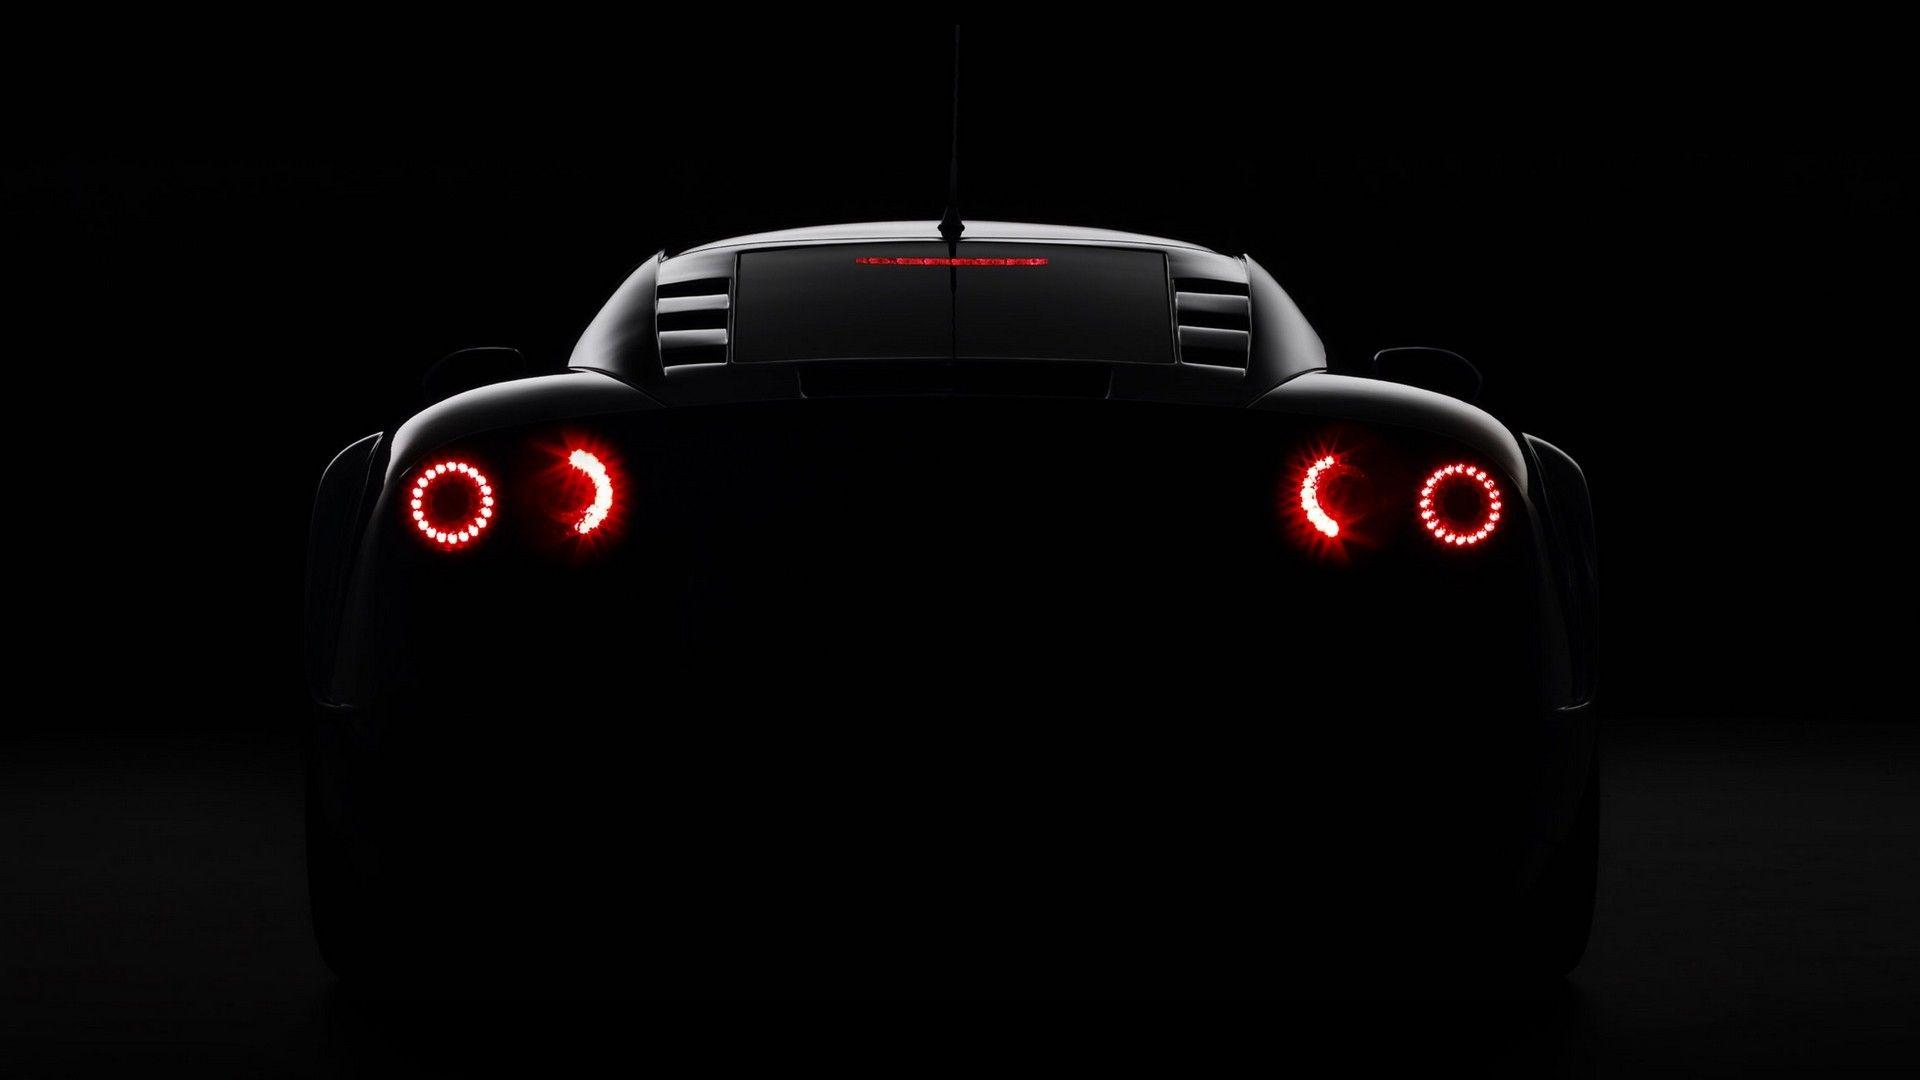 Noble M600 dark glowing rear angle view sports car wallpaper